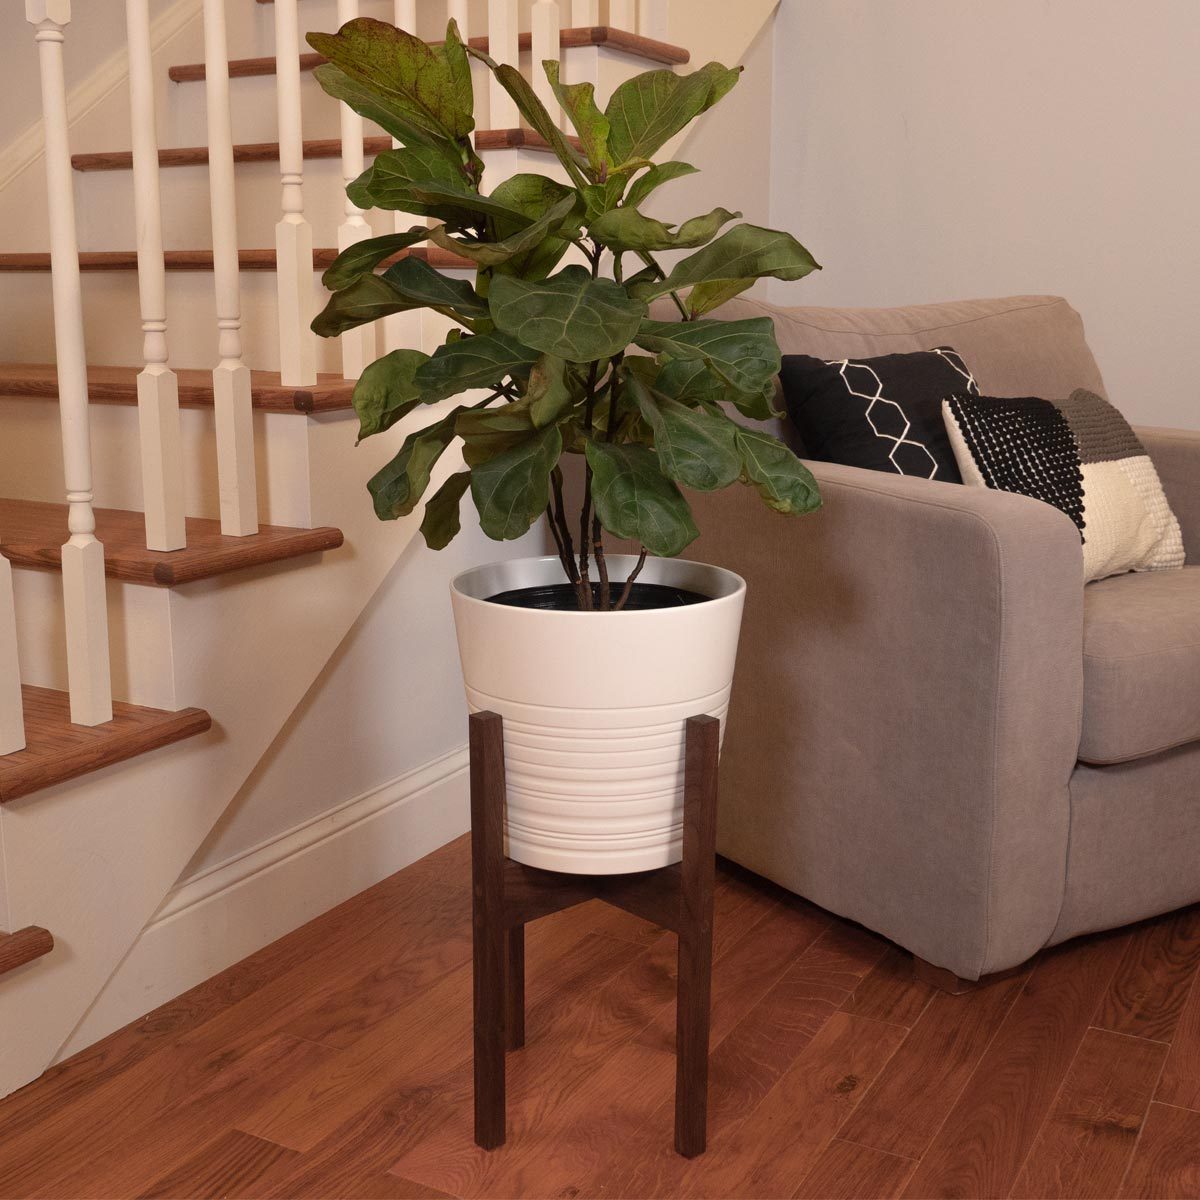 How to Build a Mid-Century Modern Plant Stand